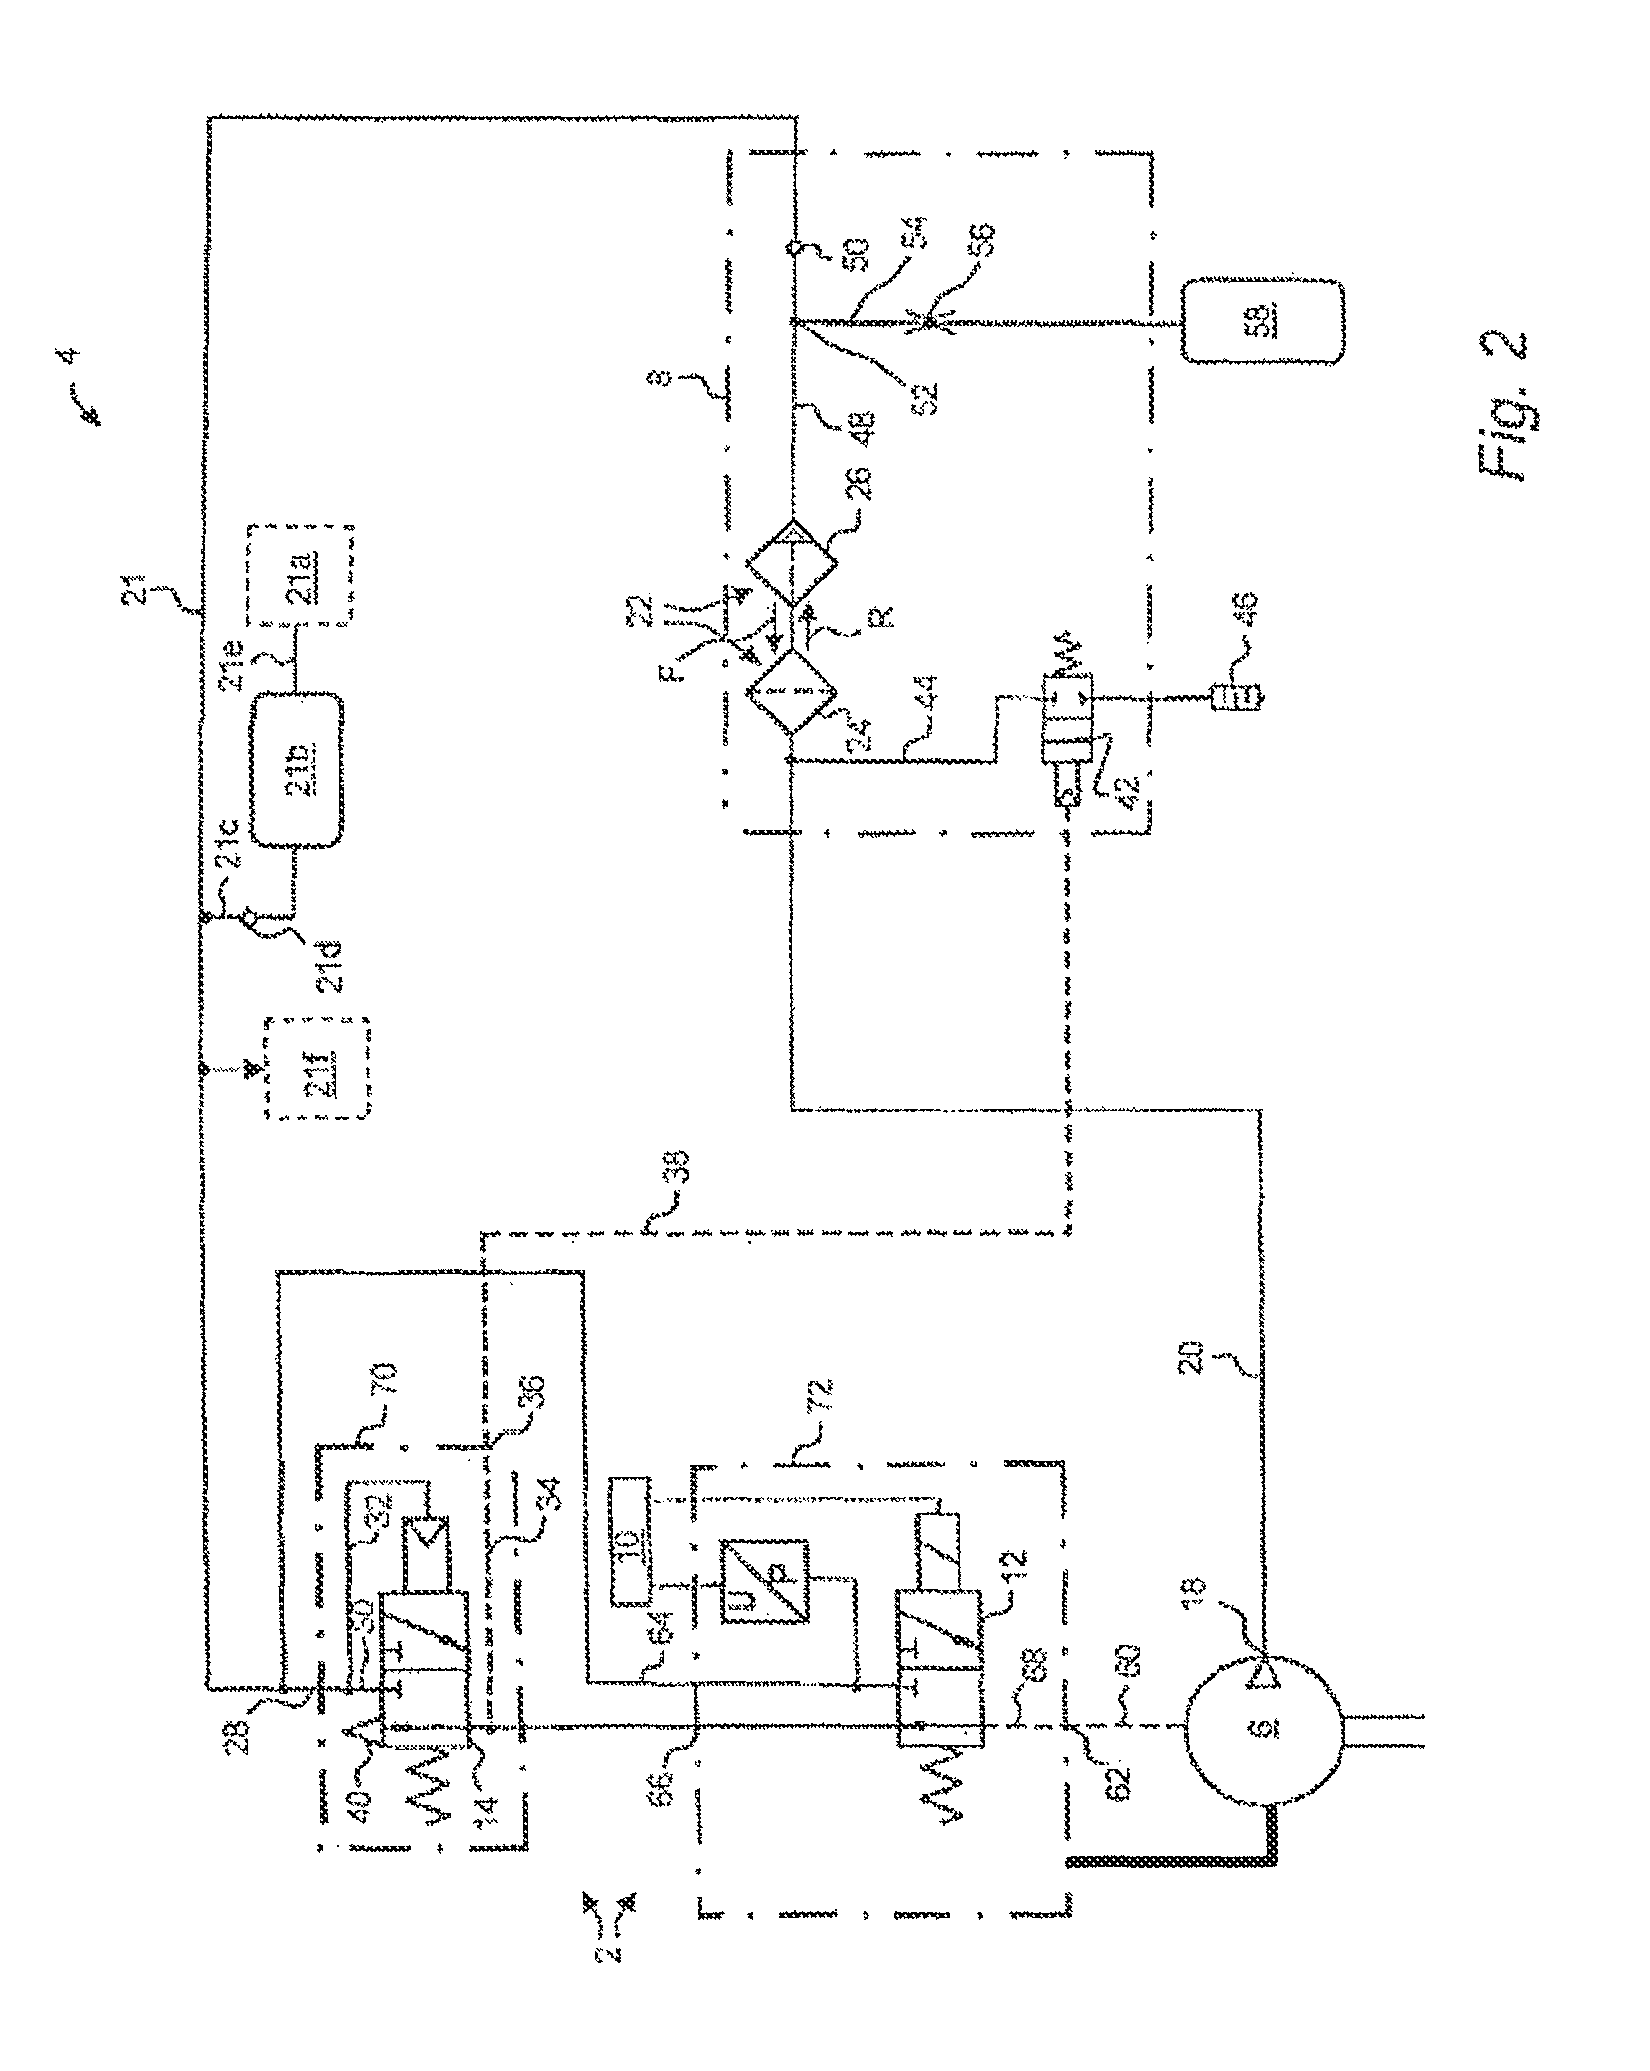 Device, method and system for compressed air control and compressed air supply